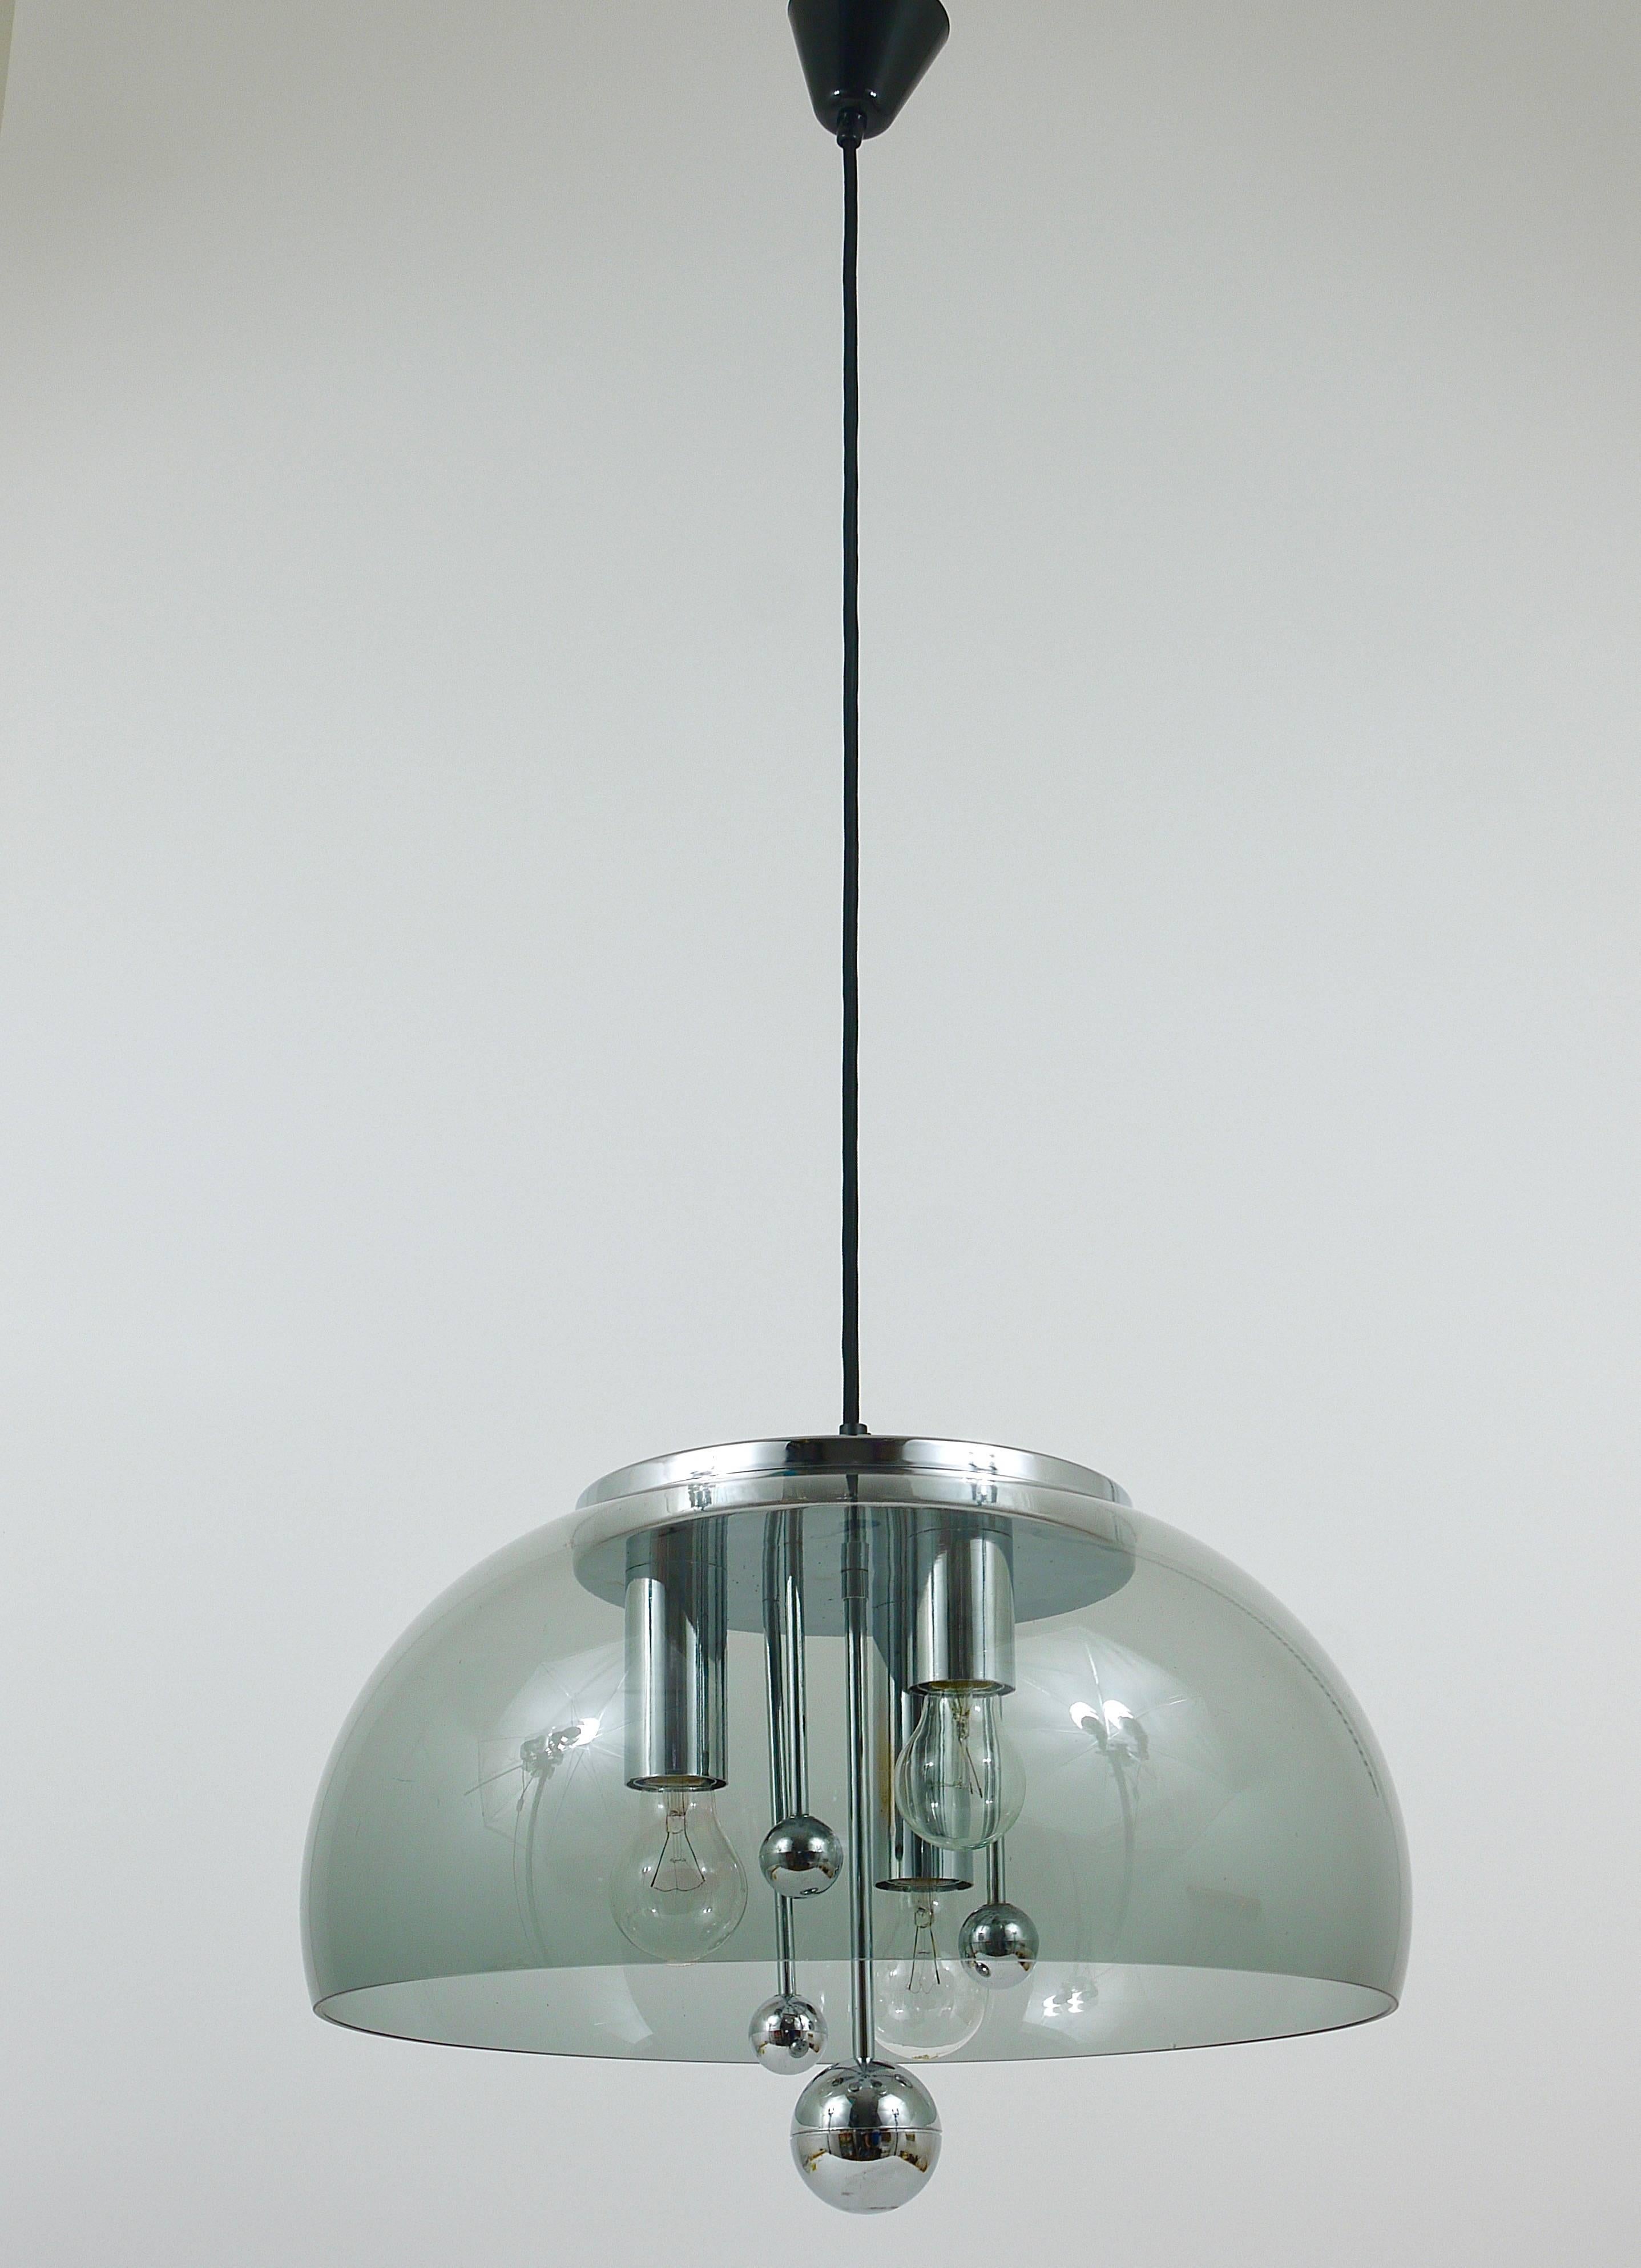 Midcentury Space Age Globe Pendant Lamp with Chromed Spheres, Germany, 1970s For Sale 4